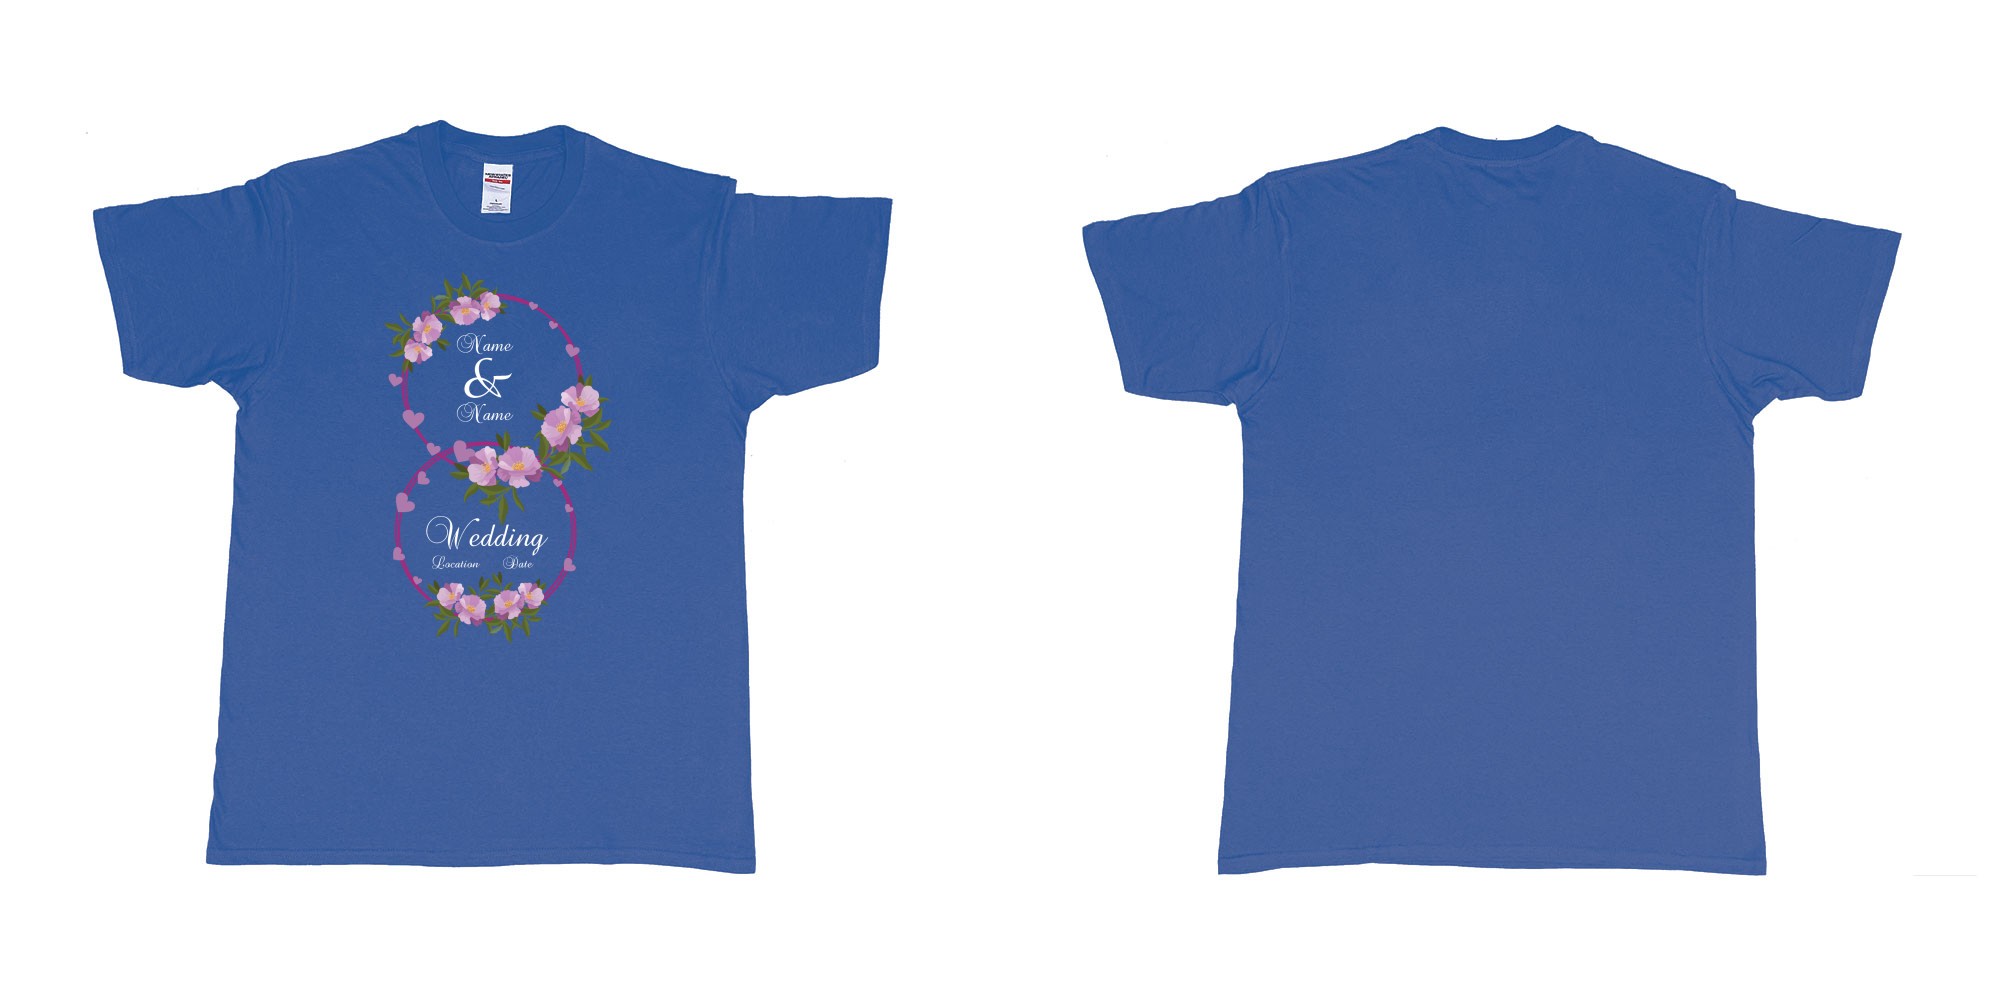 Custom tshirt design wedding hearts flower rings in fabric color royal-blue choice your own text made in Bali by The Pirate Way